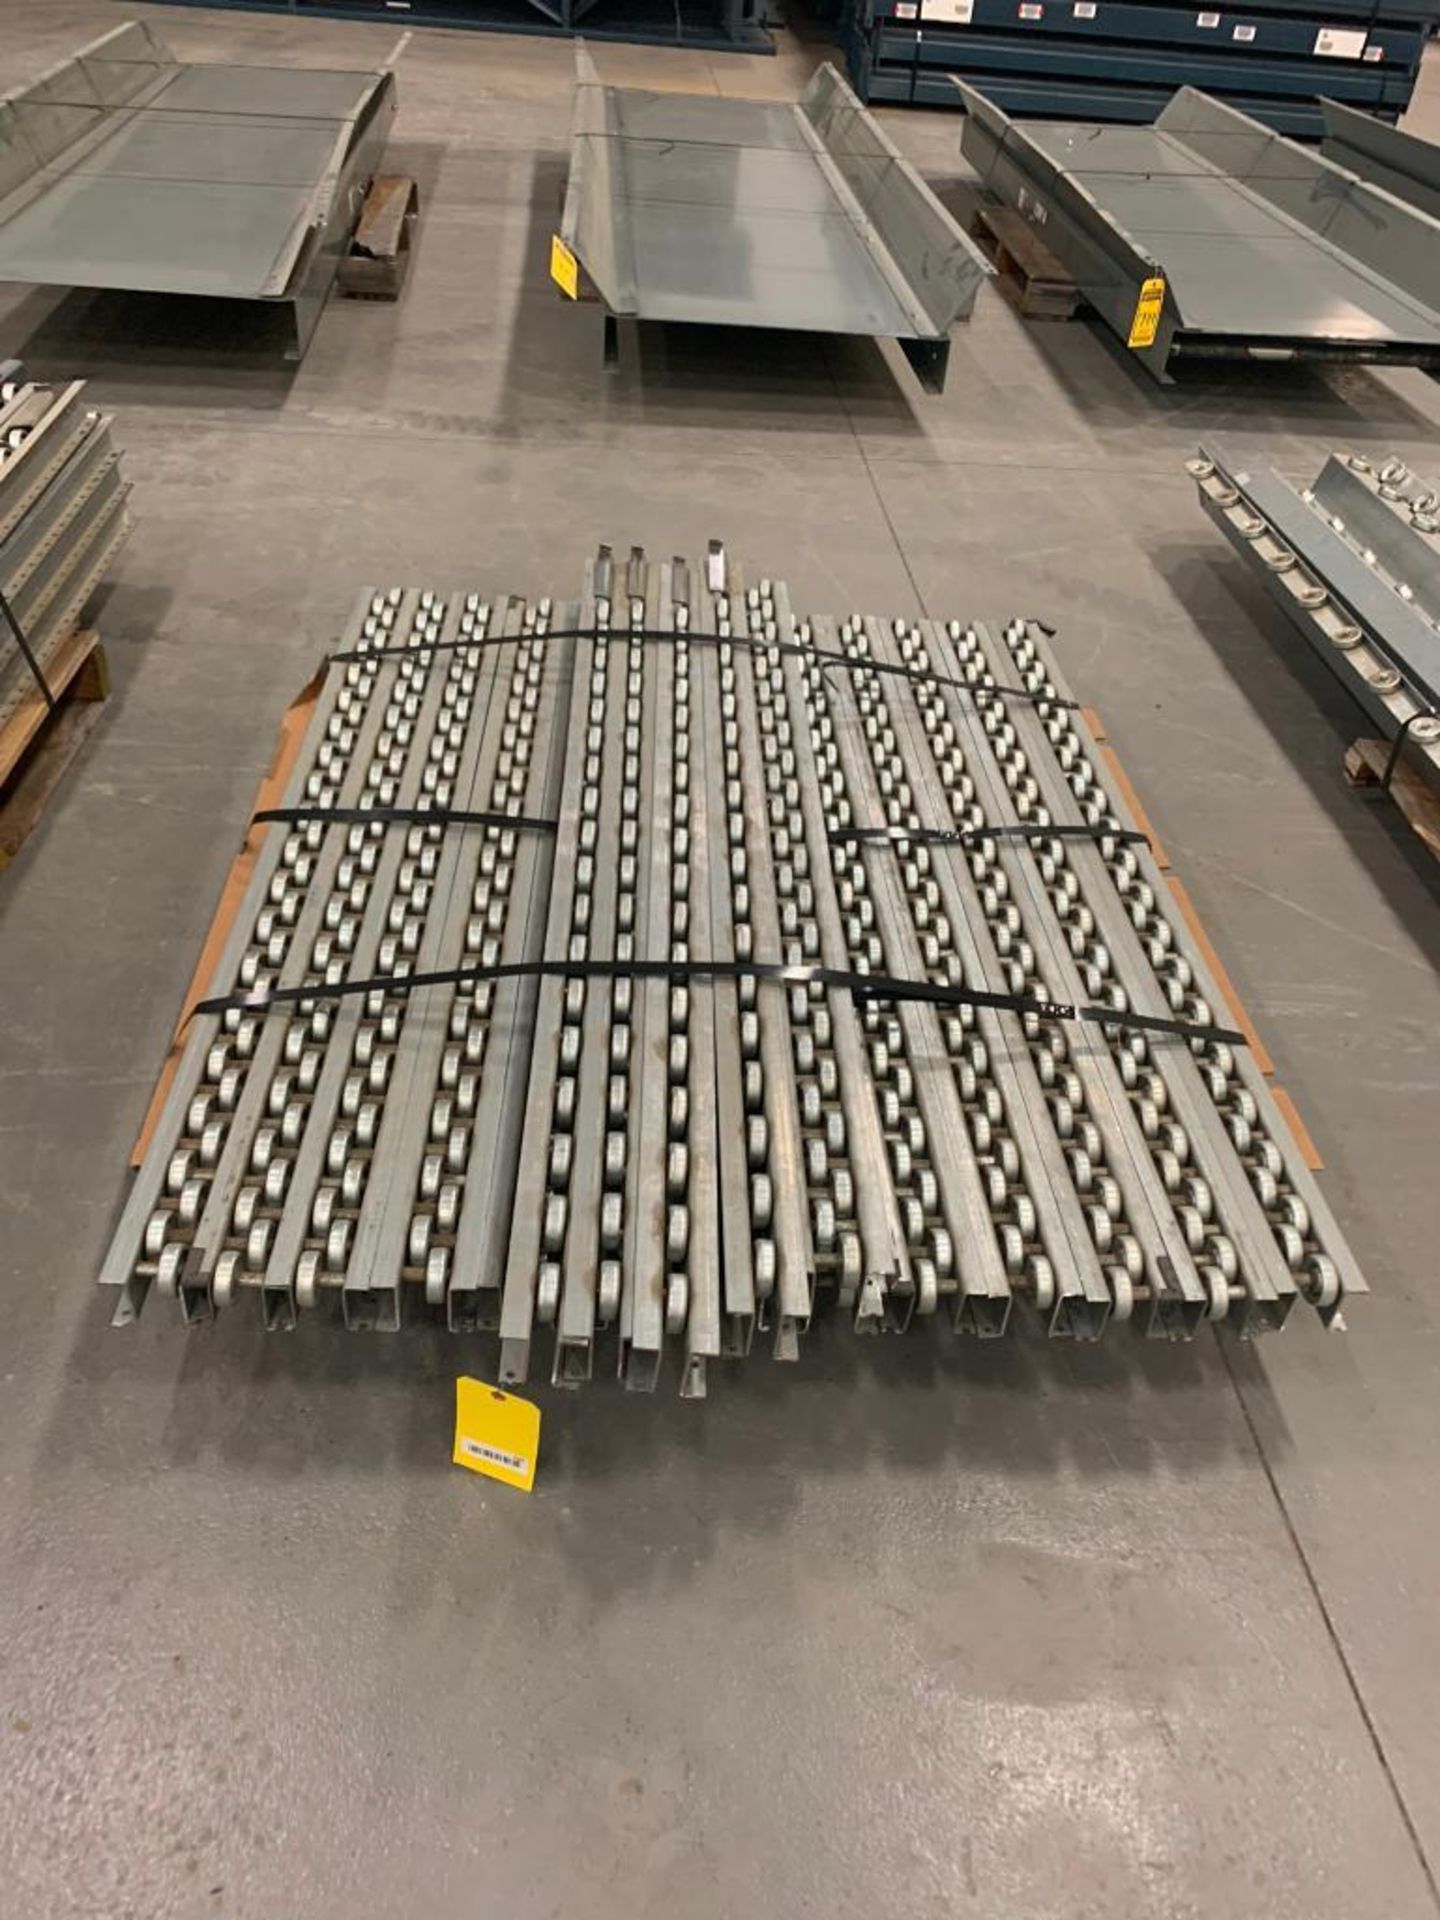 (76) 56" OFFSET ROLLERS